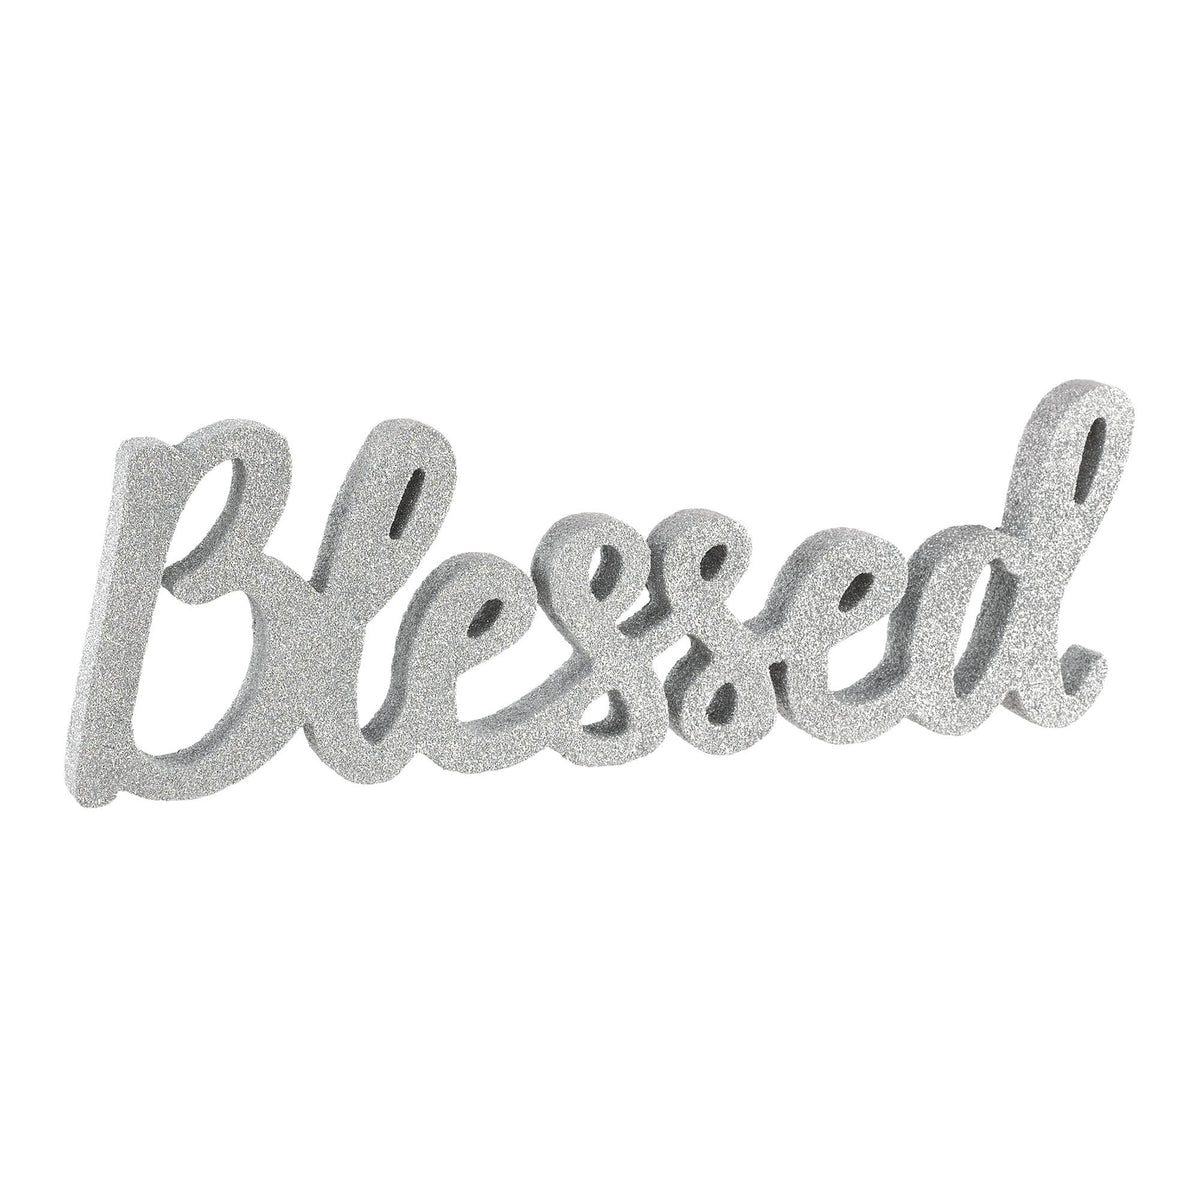 Blessed Script "Blessed" Sign 4 1/2" x 13 3/4"